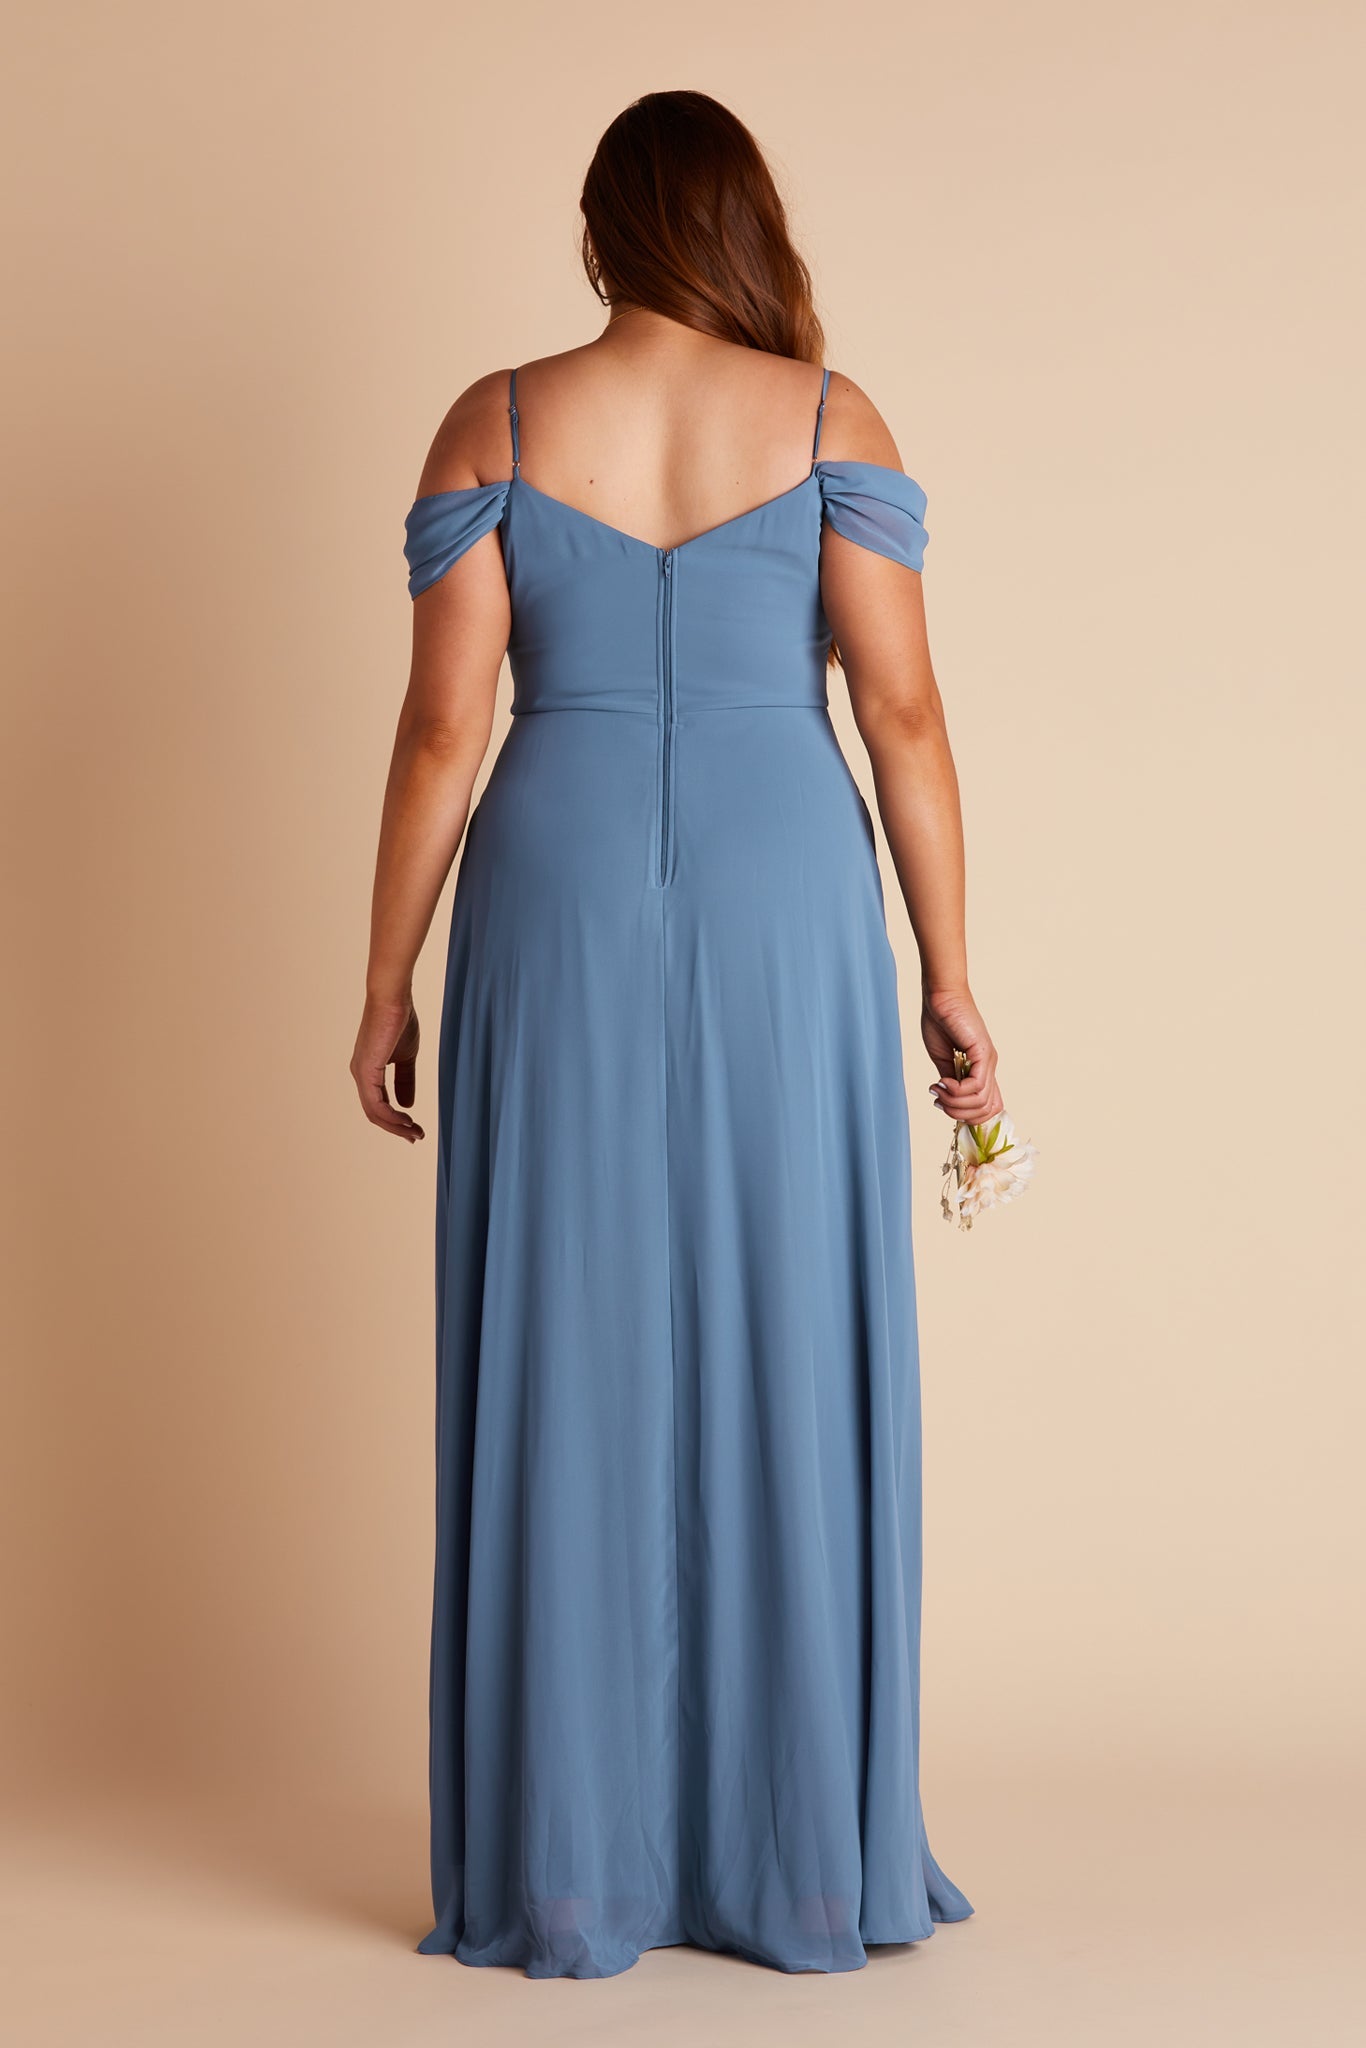 Devin convertible plus size bridesmaids dress with slit in twilight blue chiffon by Birdy Grey, back view